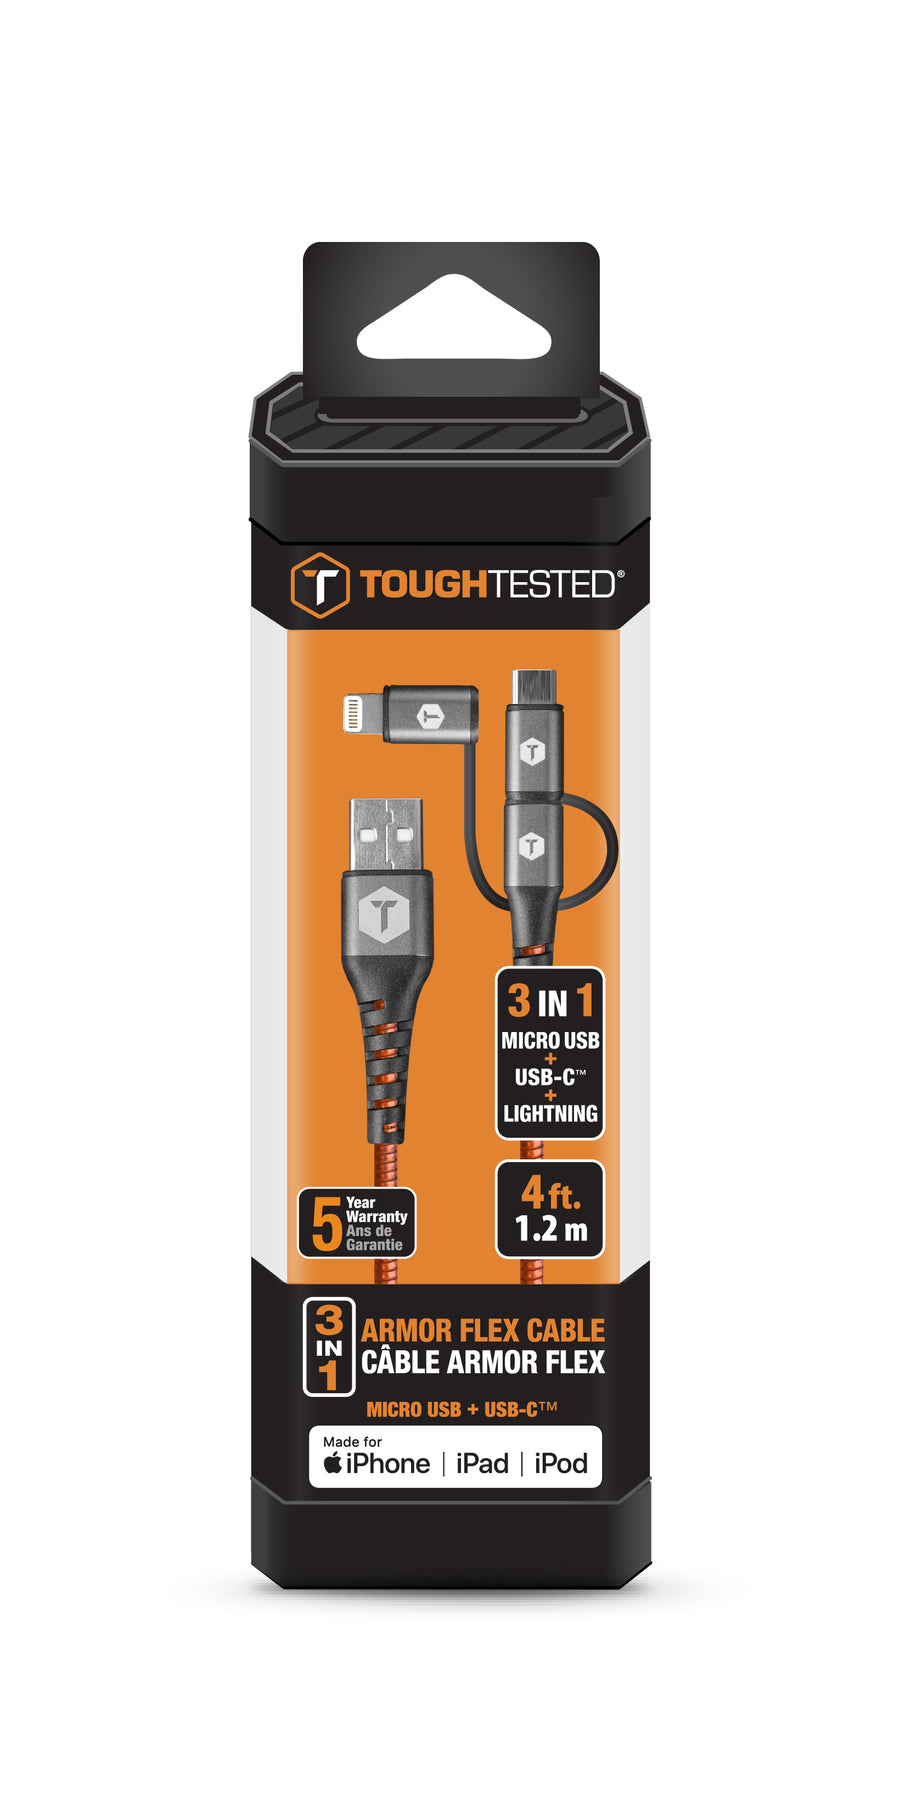 4 Ft. 3 in 1 Cable with USB-C, Micro USB, & Lightning